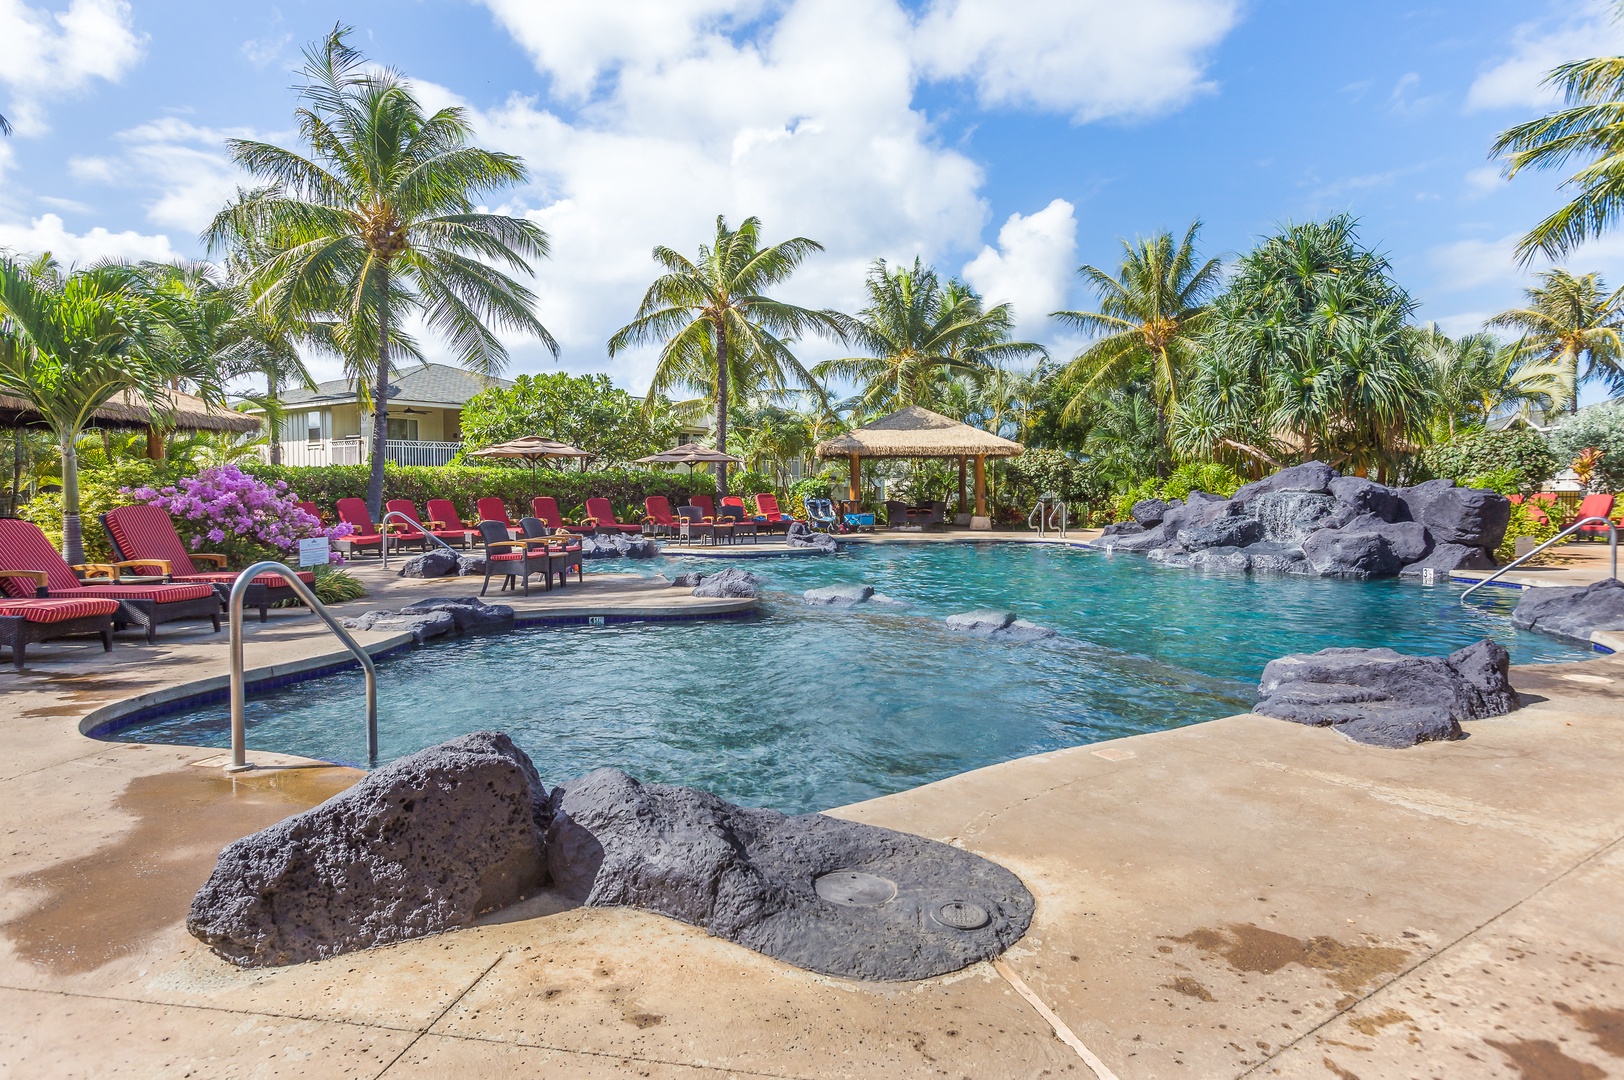 Kapolei Vacation Rentals, Ko Olina Kai 1081C - Go for a swim in the crystal blue waters of the pool.